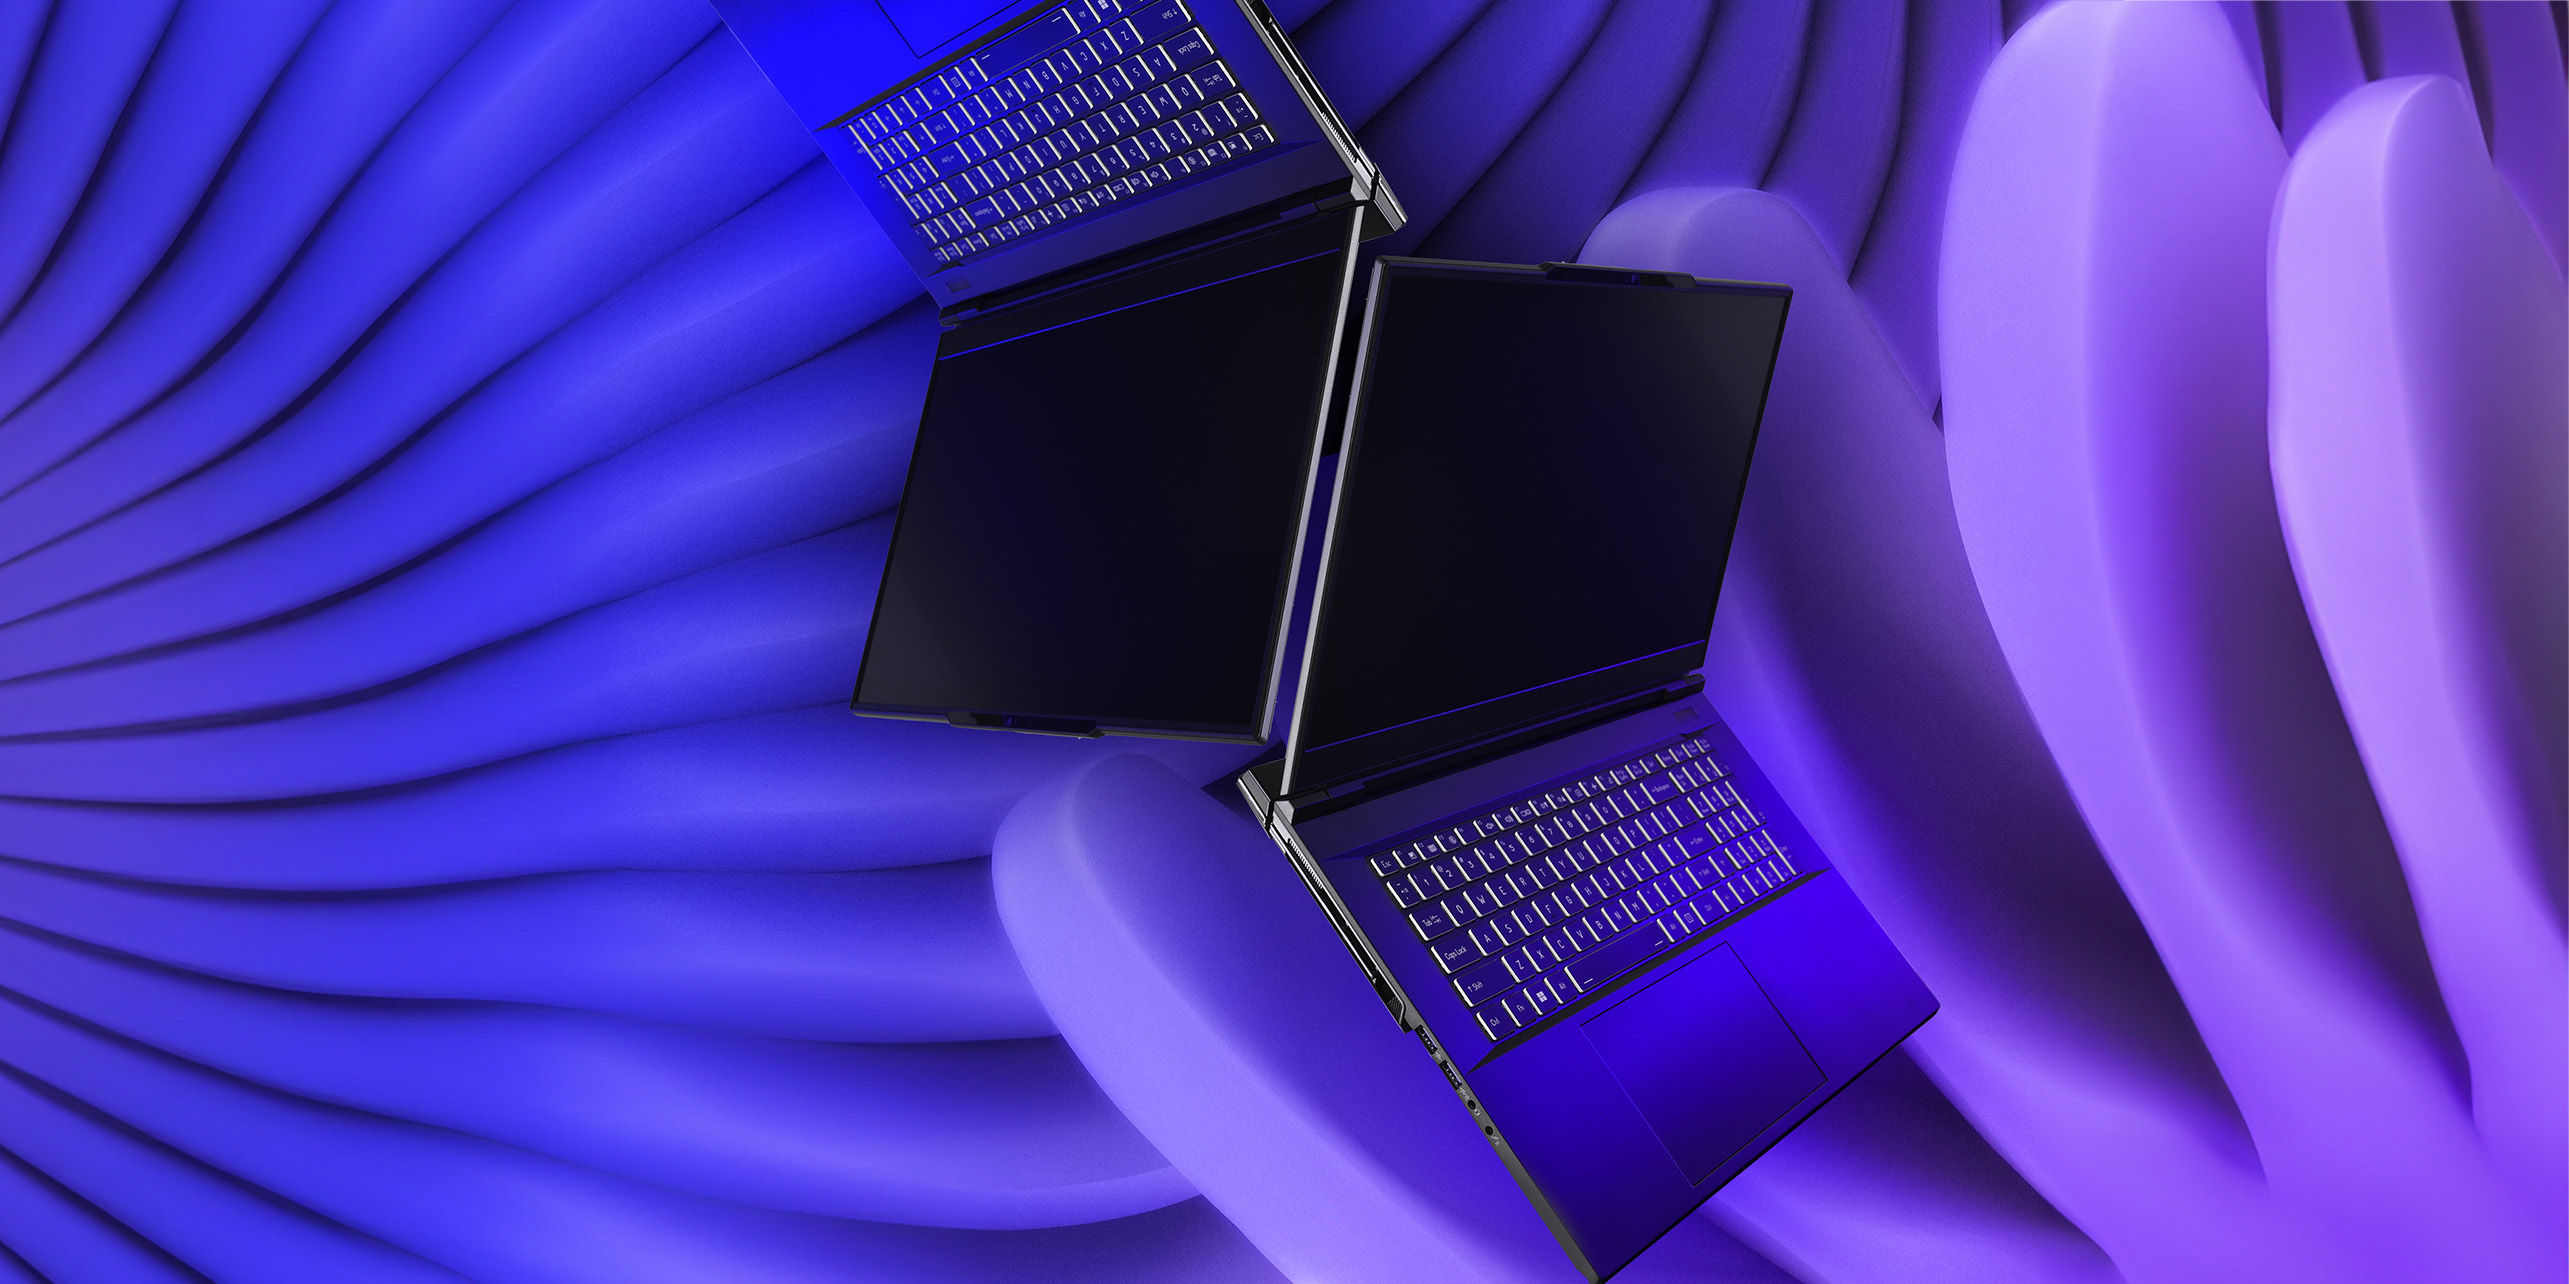 Velocity Micro Signature 17 Laptops on Abstract Violet Background